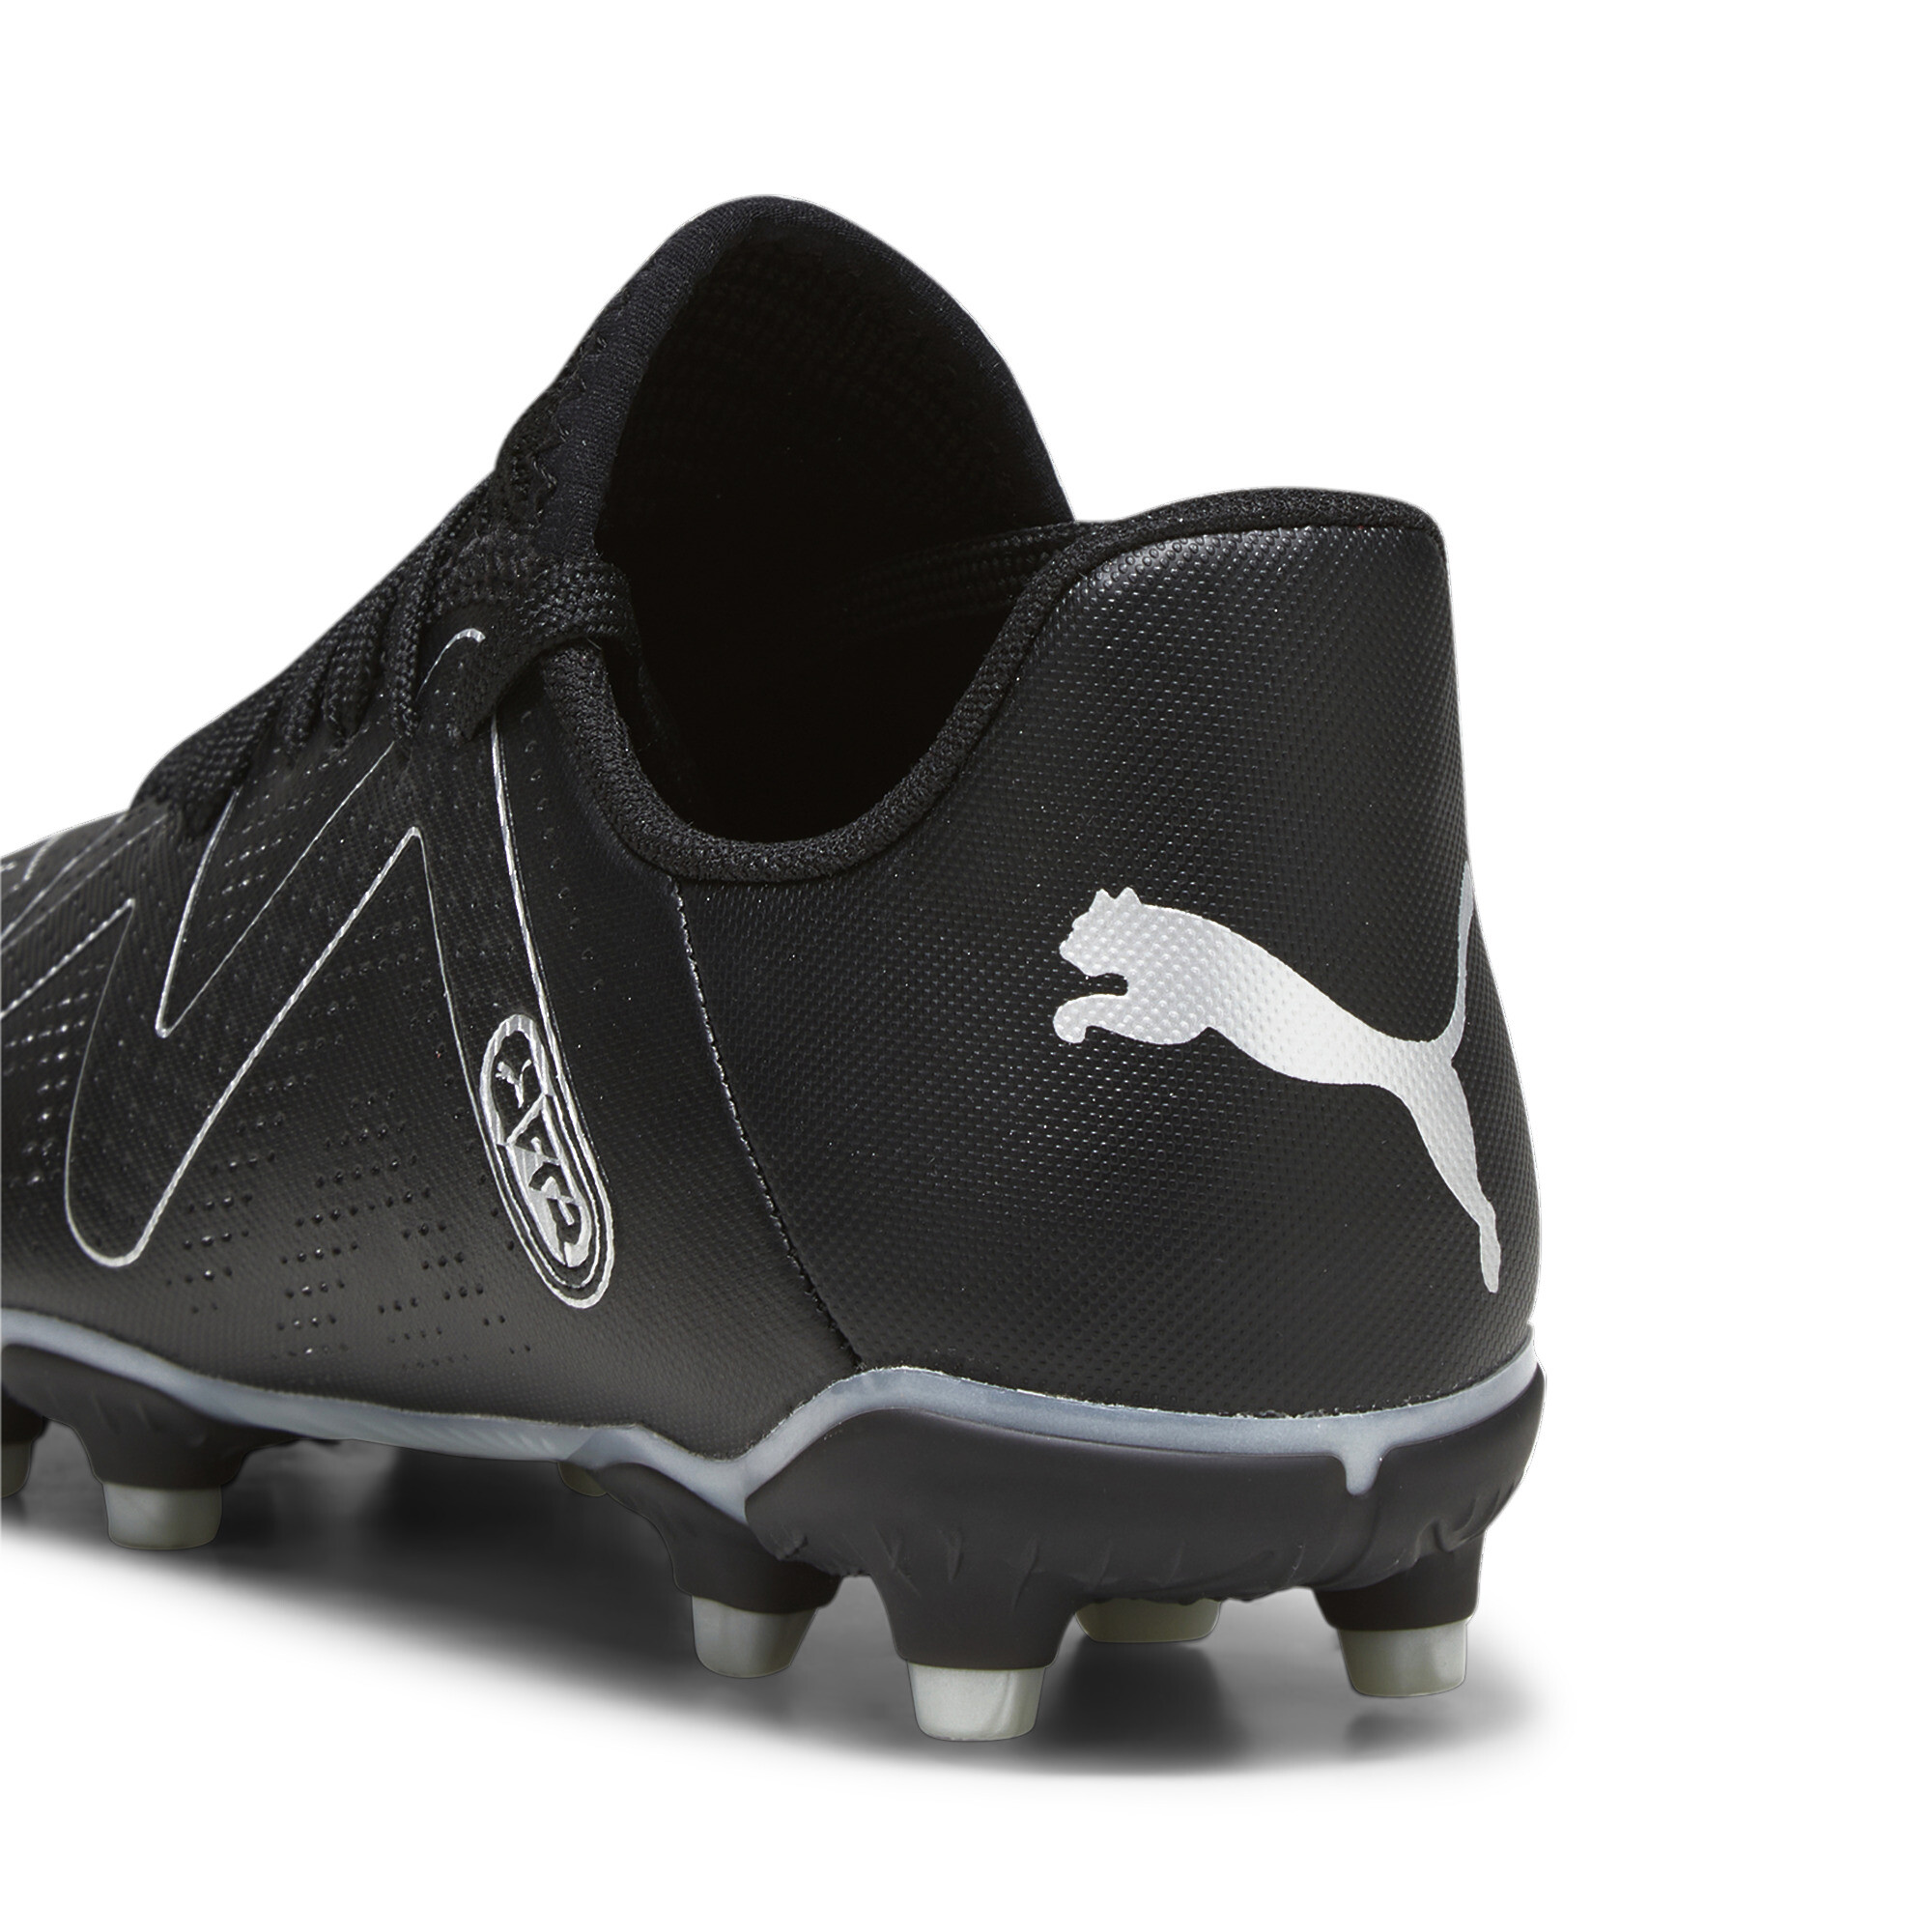 Puma FUTURE PLAY FG/AG Youth Football Boots, Black, Size 28, Shoes